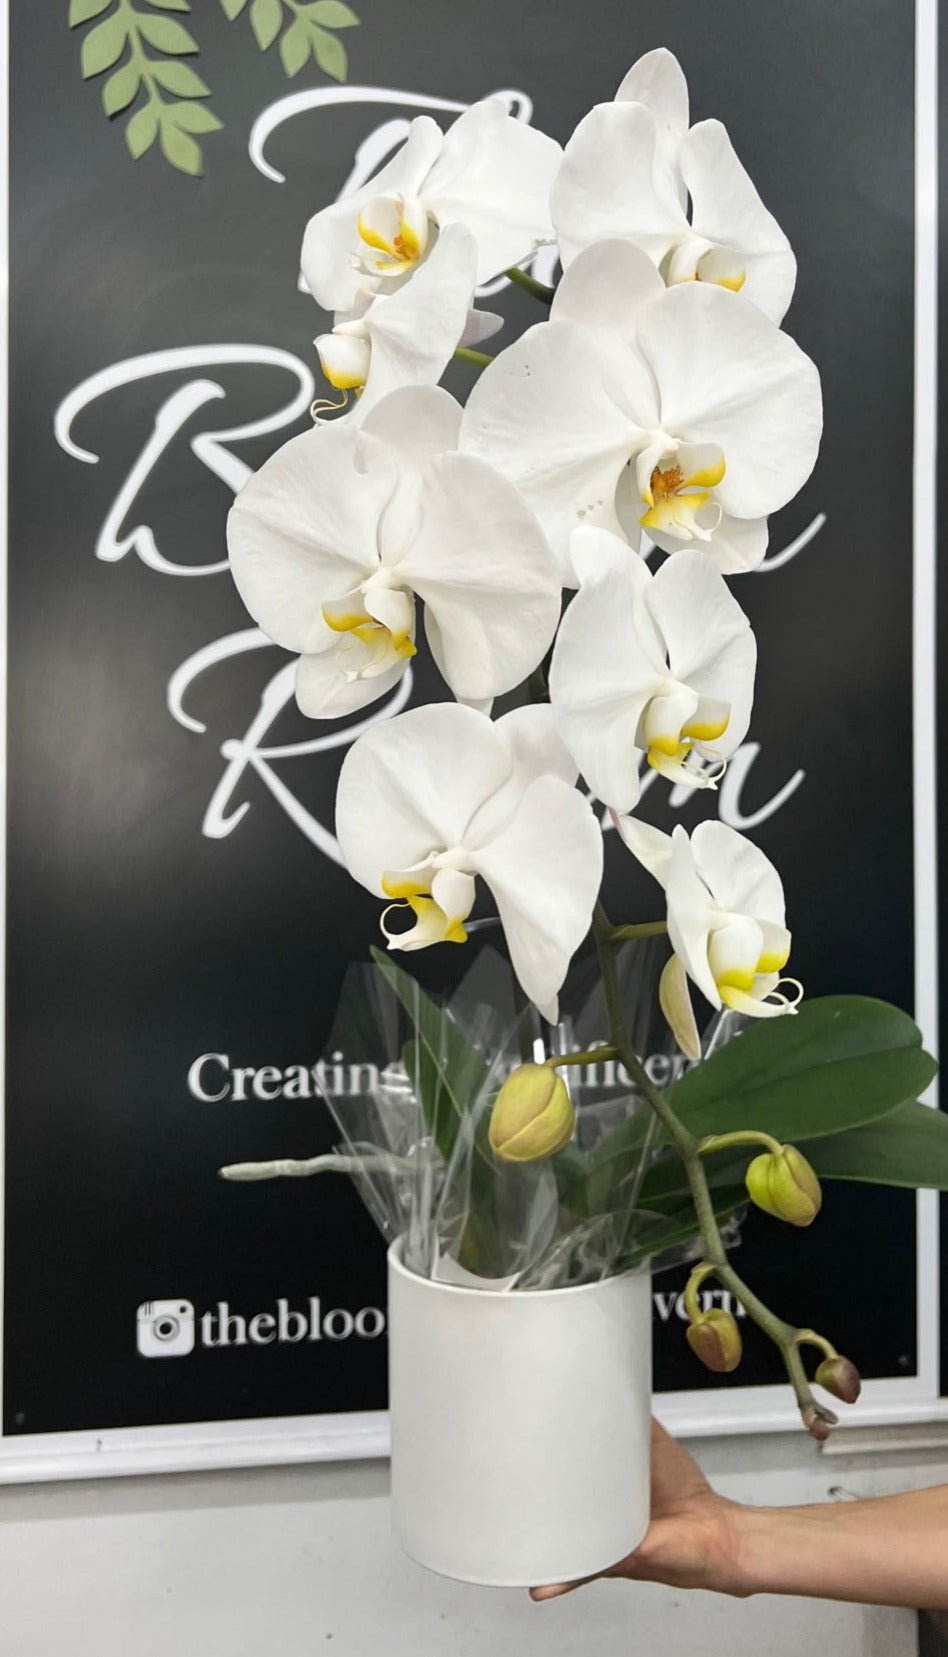 Large Orchid in a Pot - The Bloom Room 